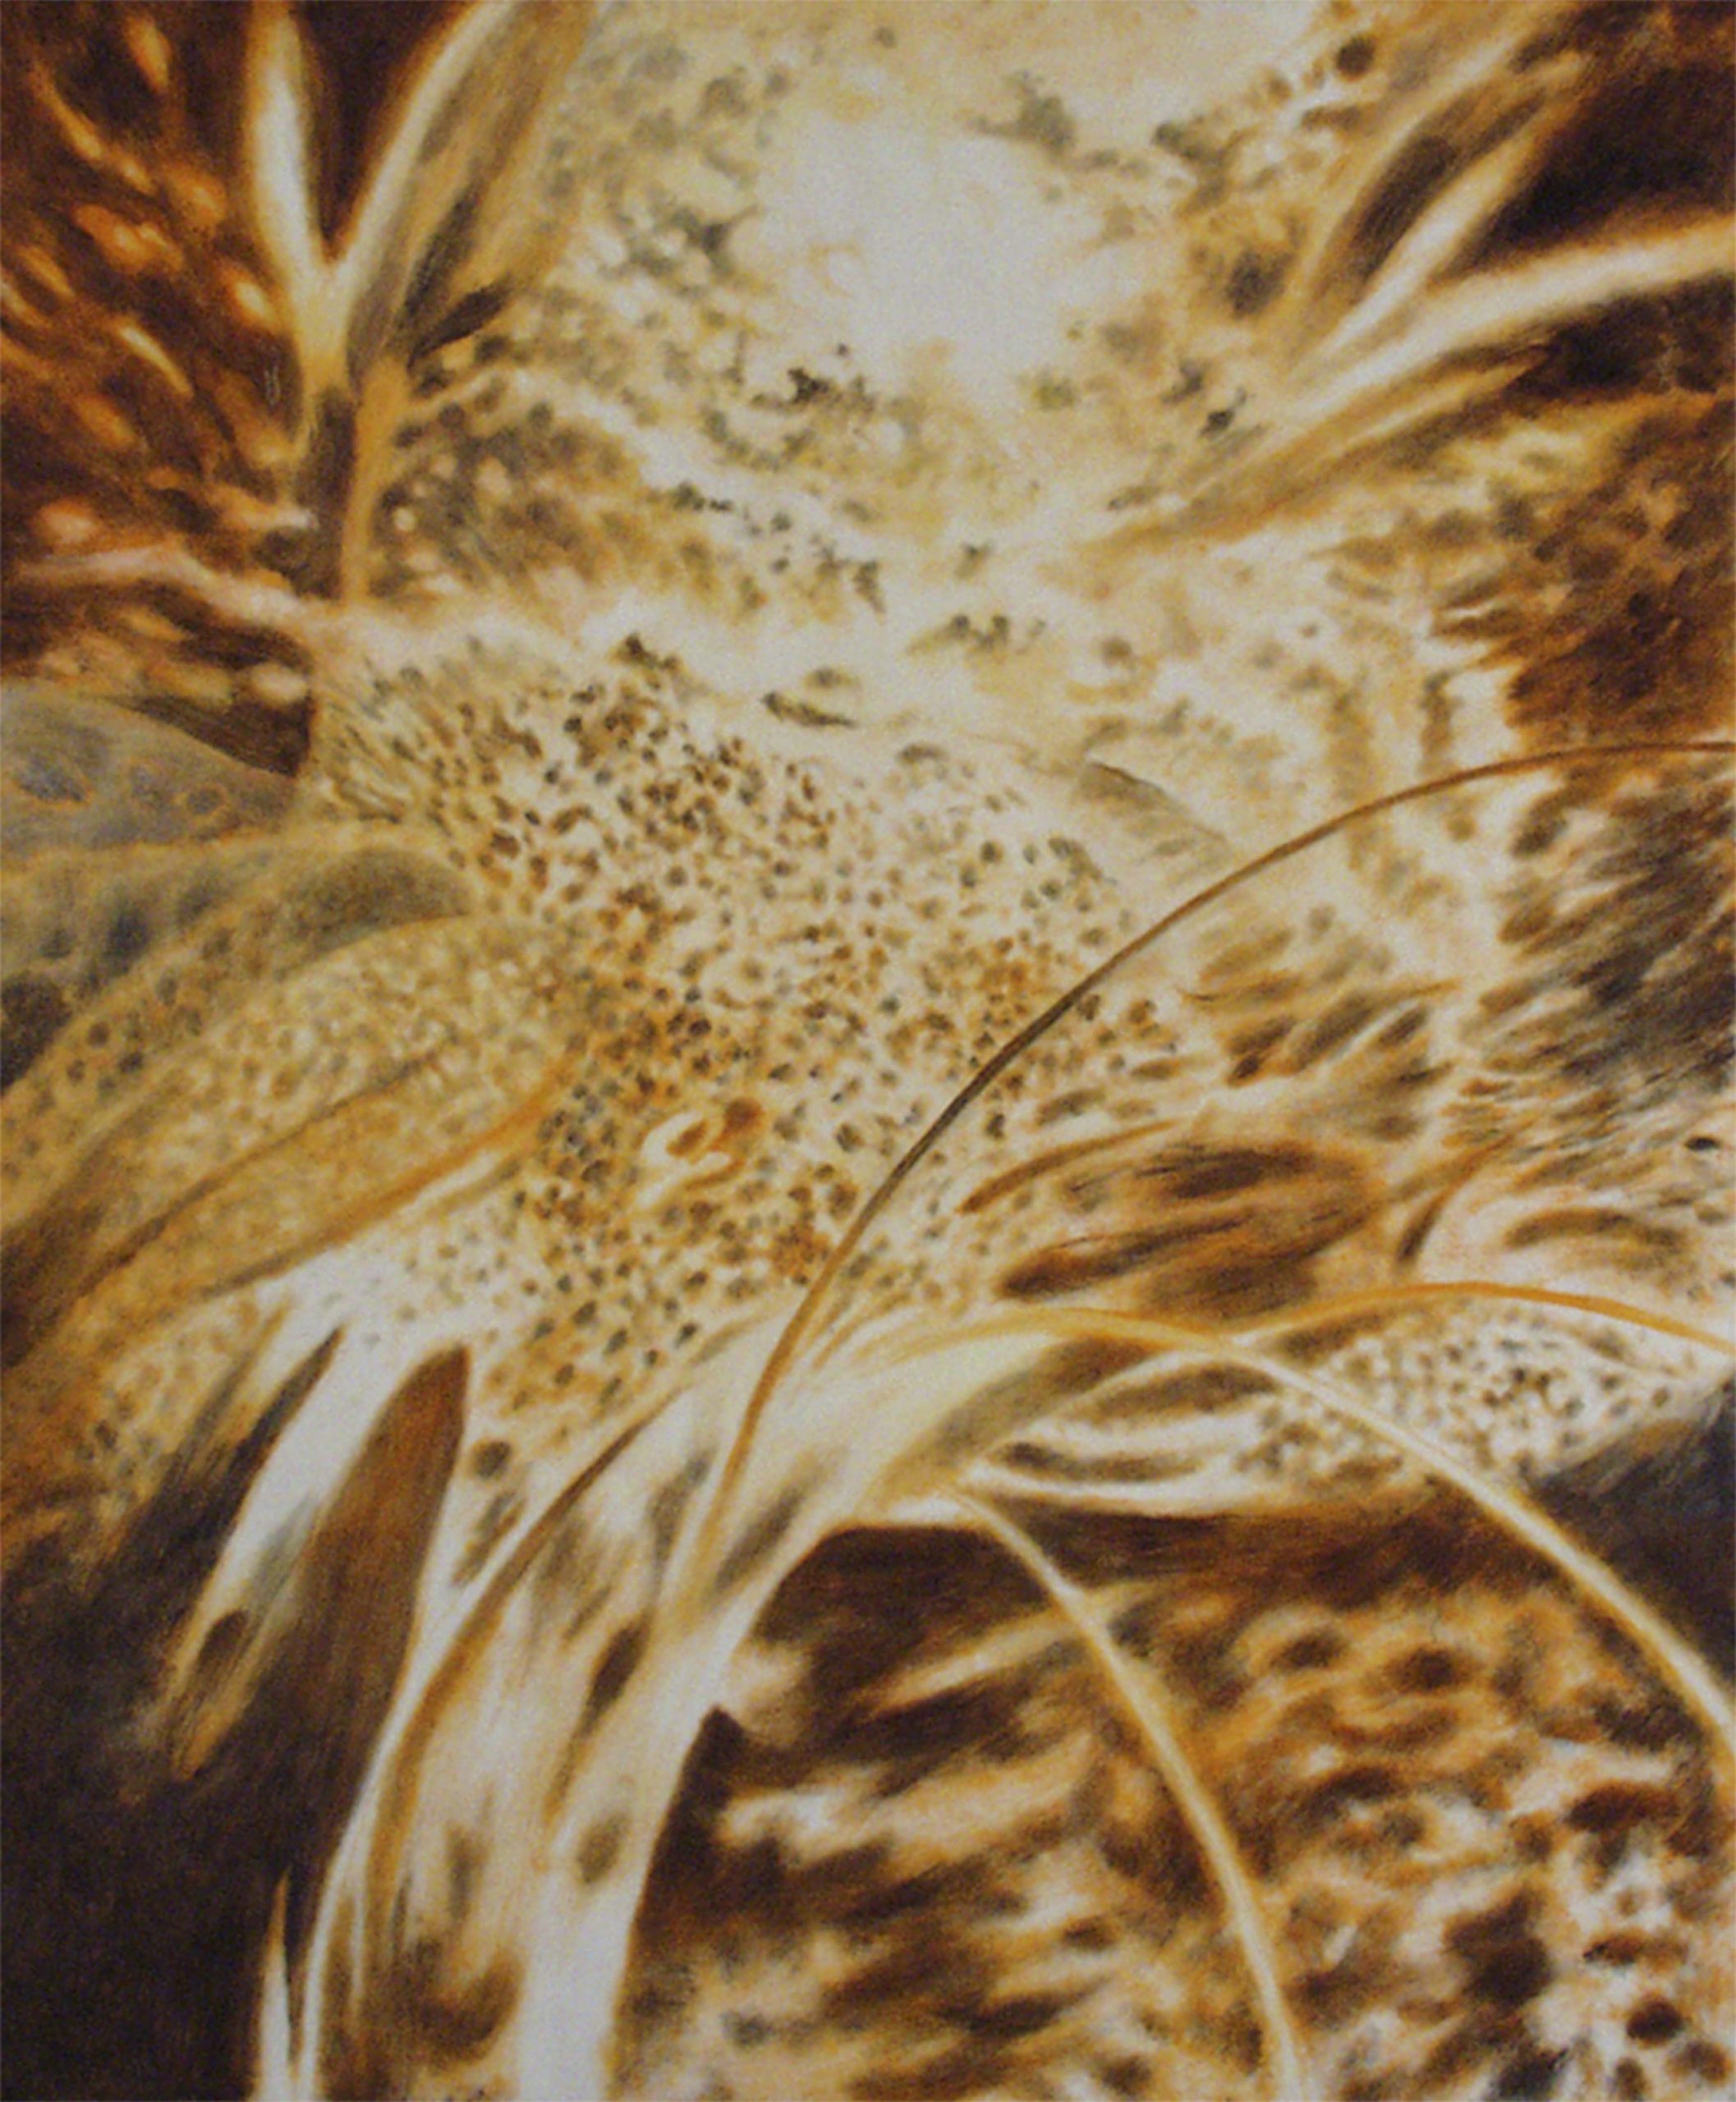 
		                					Shirley Crow		                																	
																											<i>Immortality,</i>  
																																								2005, 
																																								oil on panel, 
																																								24 x 20 x 2 1/2 inches 
																								
		                				